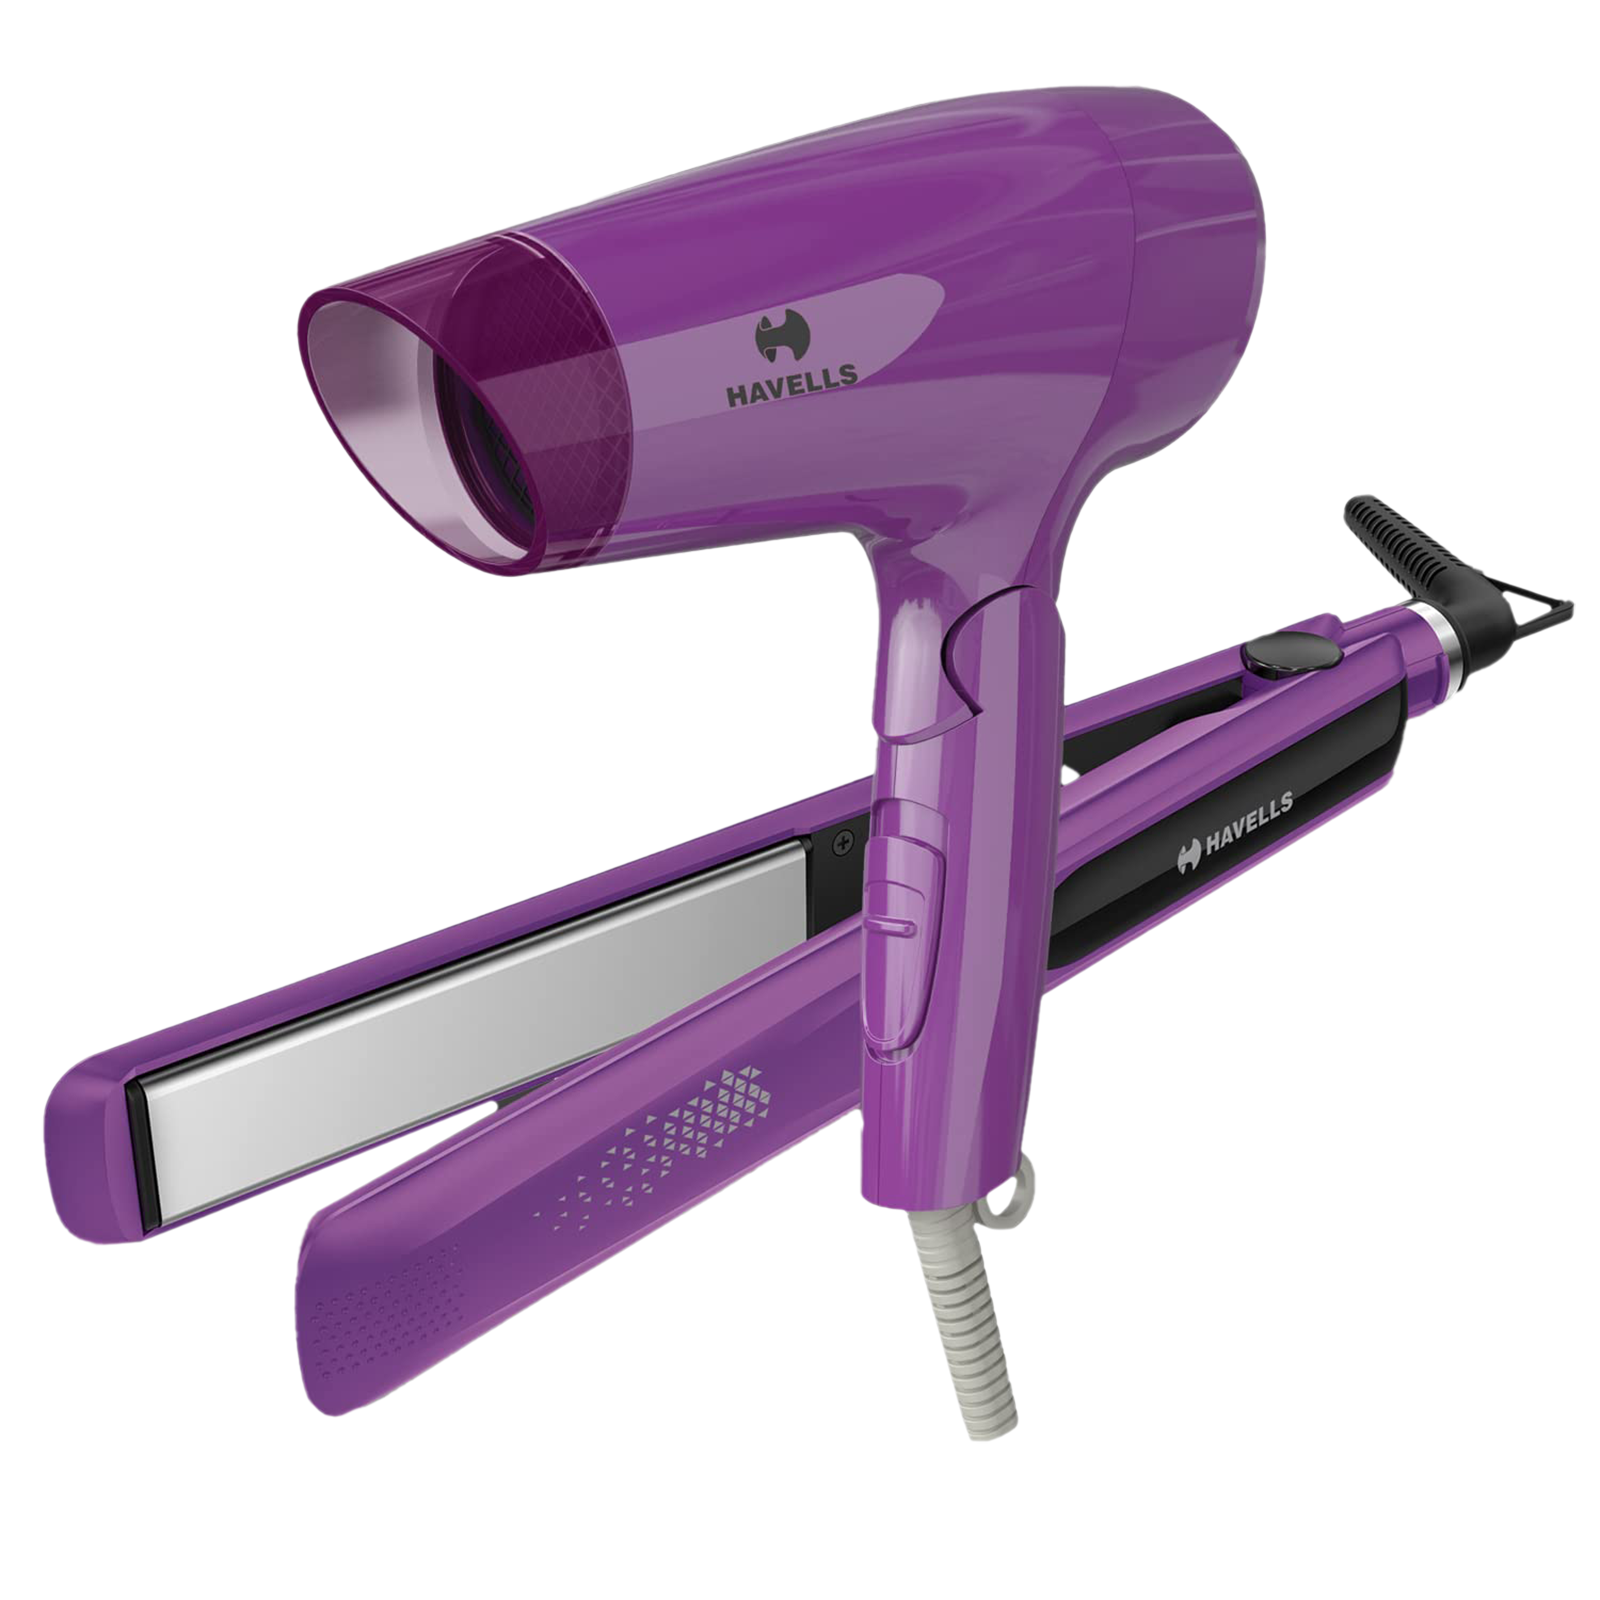 Buy HAVELLS HC4025 Hair Styler with Instant Heat Technology (LED Indicator,  Purple) Online - Croma